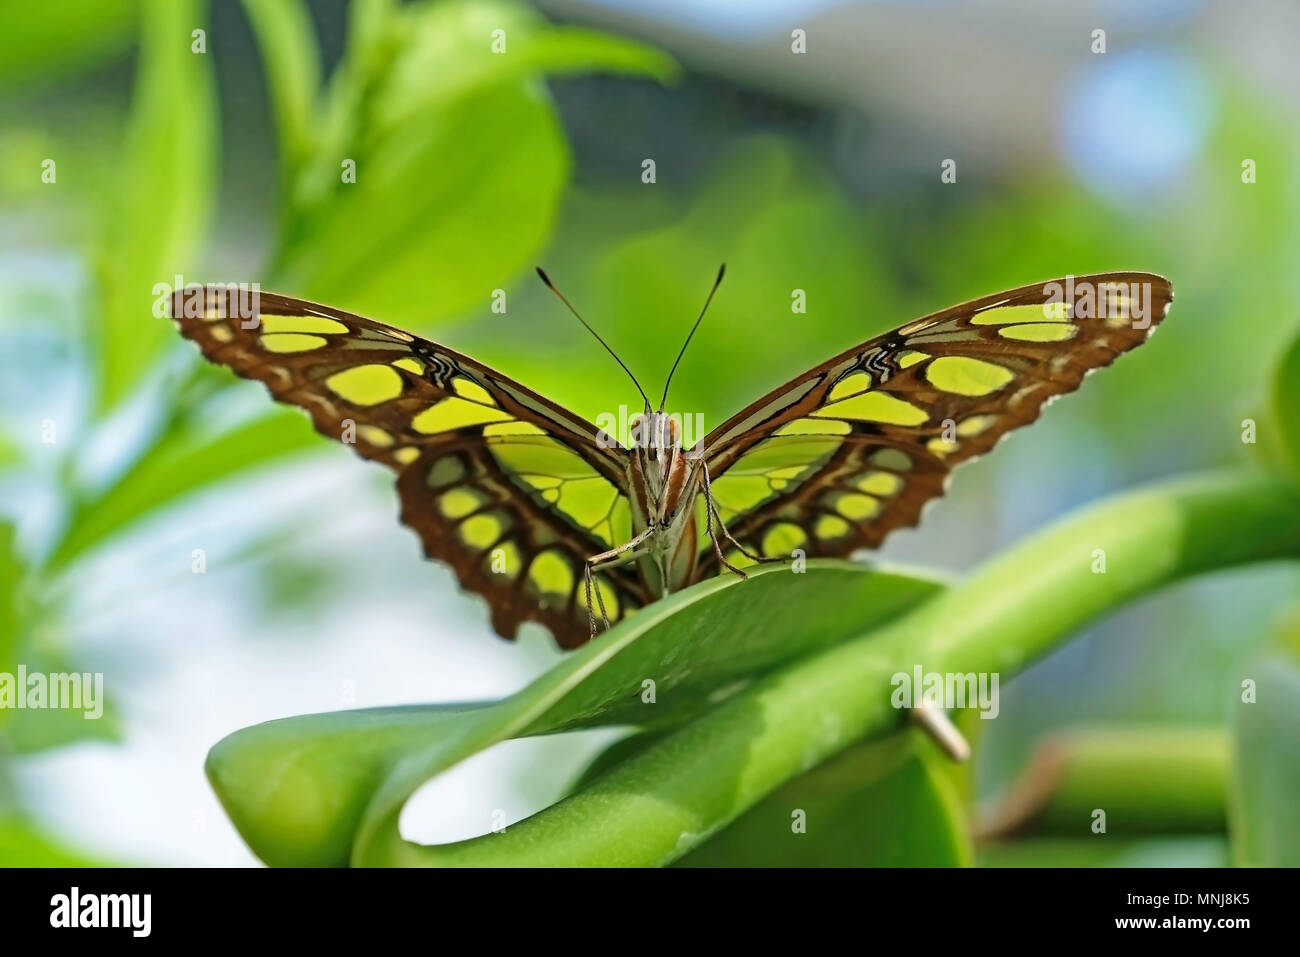 Malachite, siproeta stelenes, butterfly perched on leaf Stock Photo